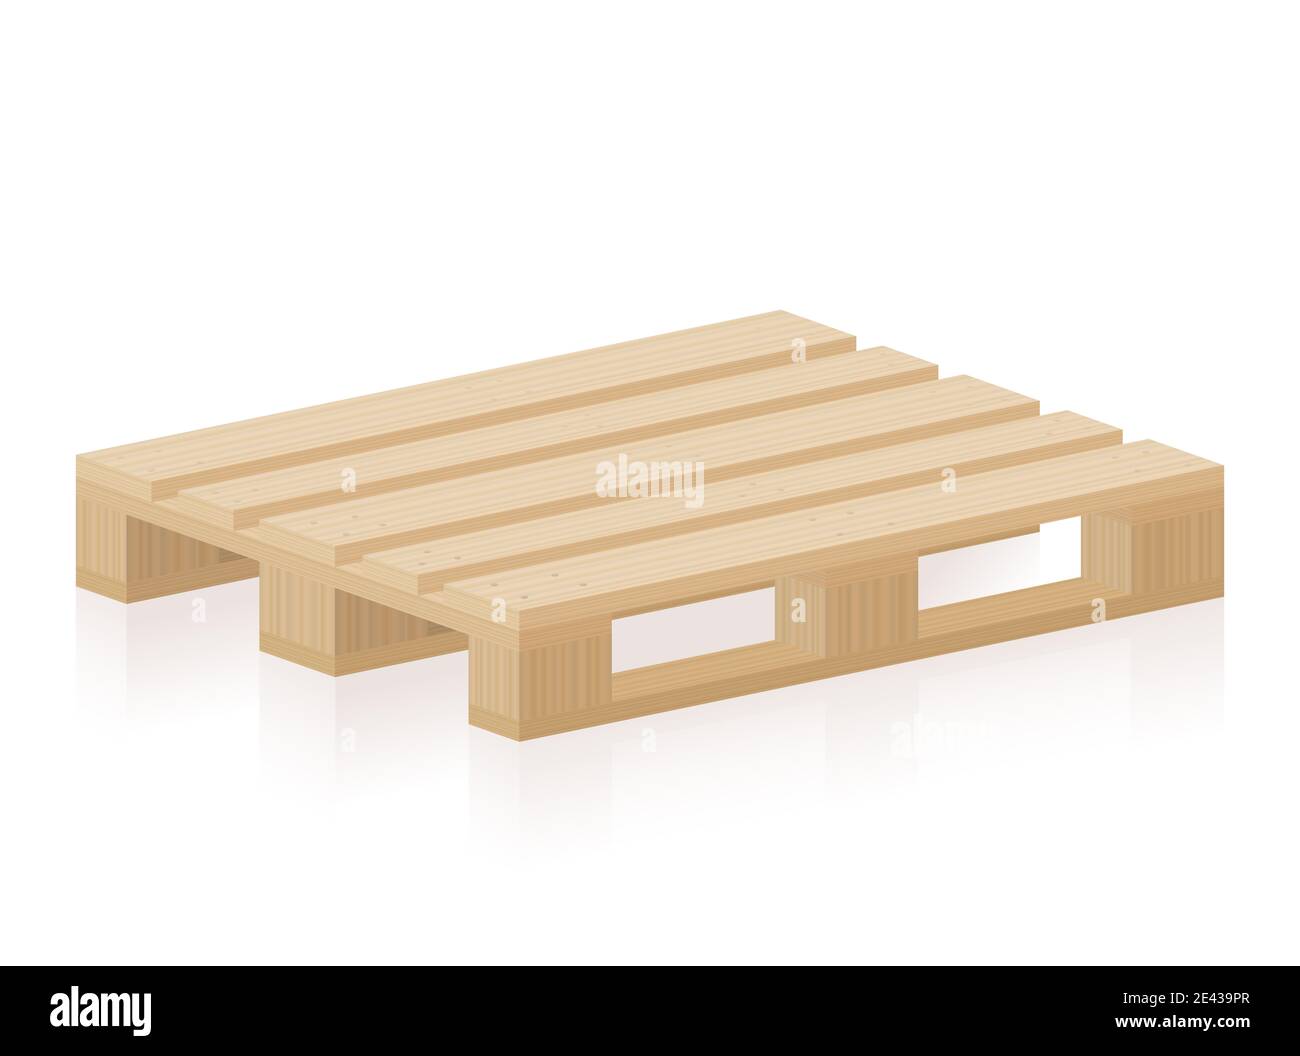 Wooden pallet or skid for transport, packaging, industry, freight, storage. Brand new, undamaged, intact, perfect, neat stillage. Stock Photo